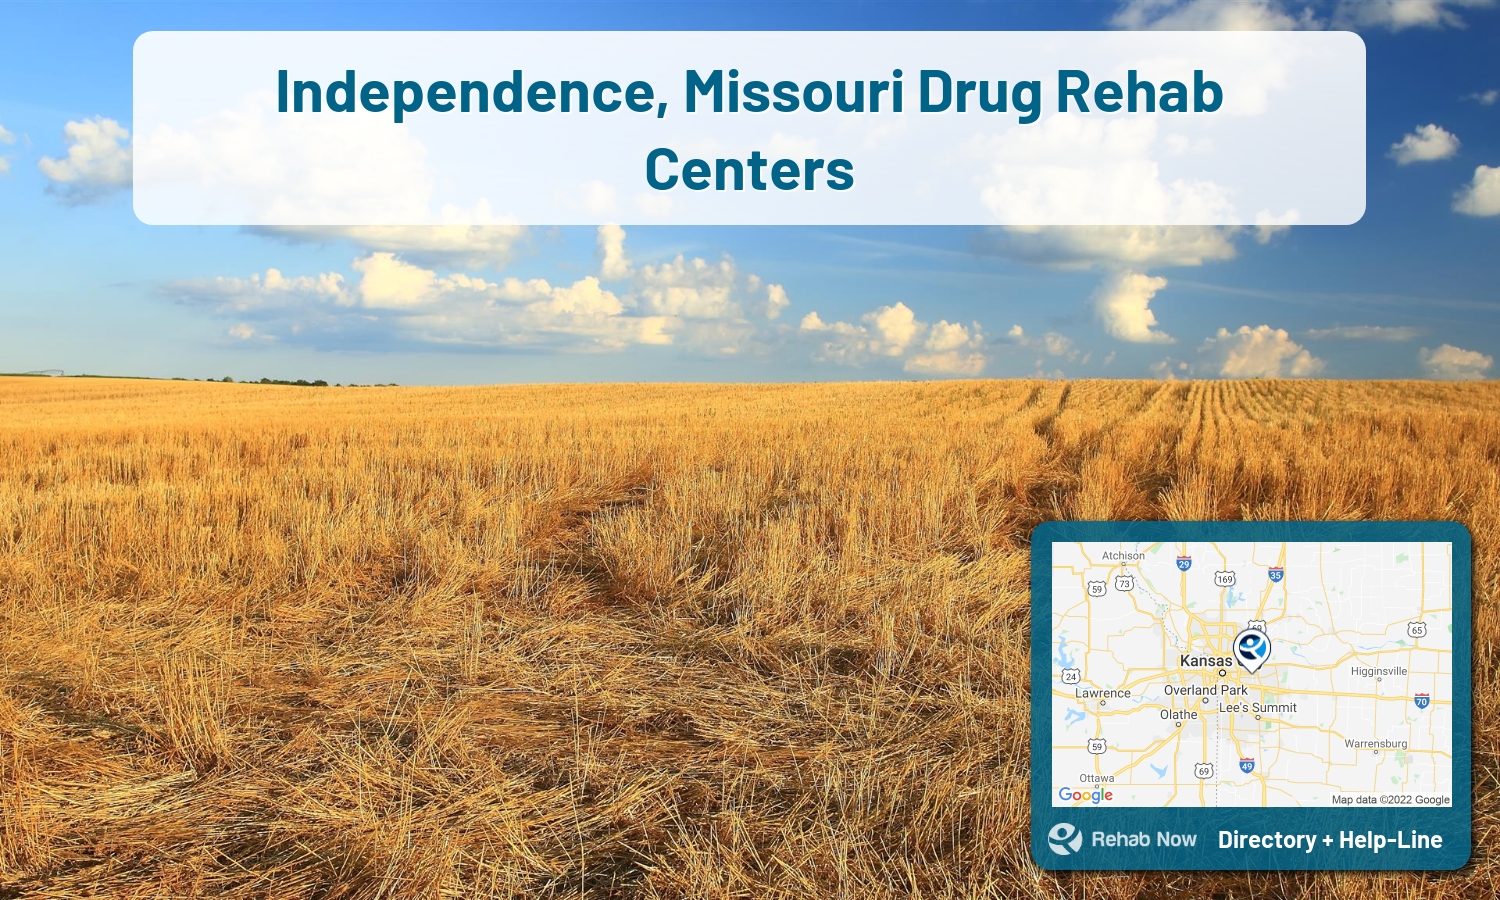 Independence, MO Treatment Centers. Find drug rehab in Independence, Missouri, or detox and treatment programs. Get the right help now!